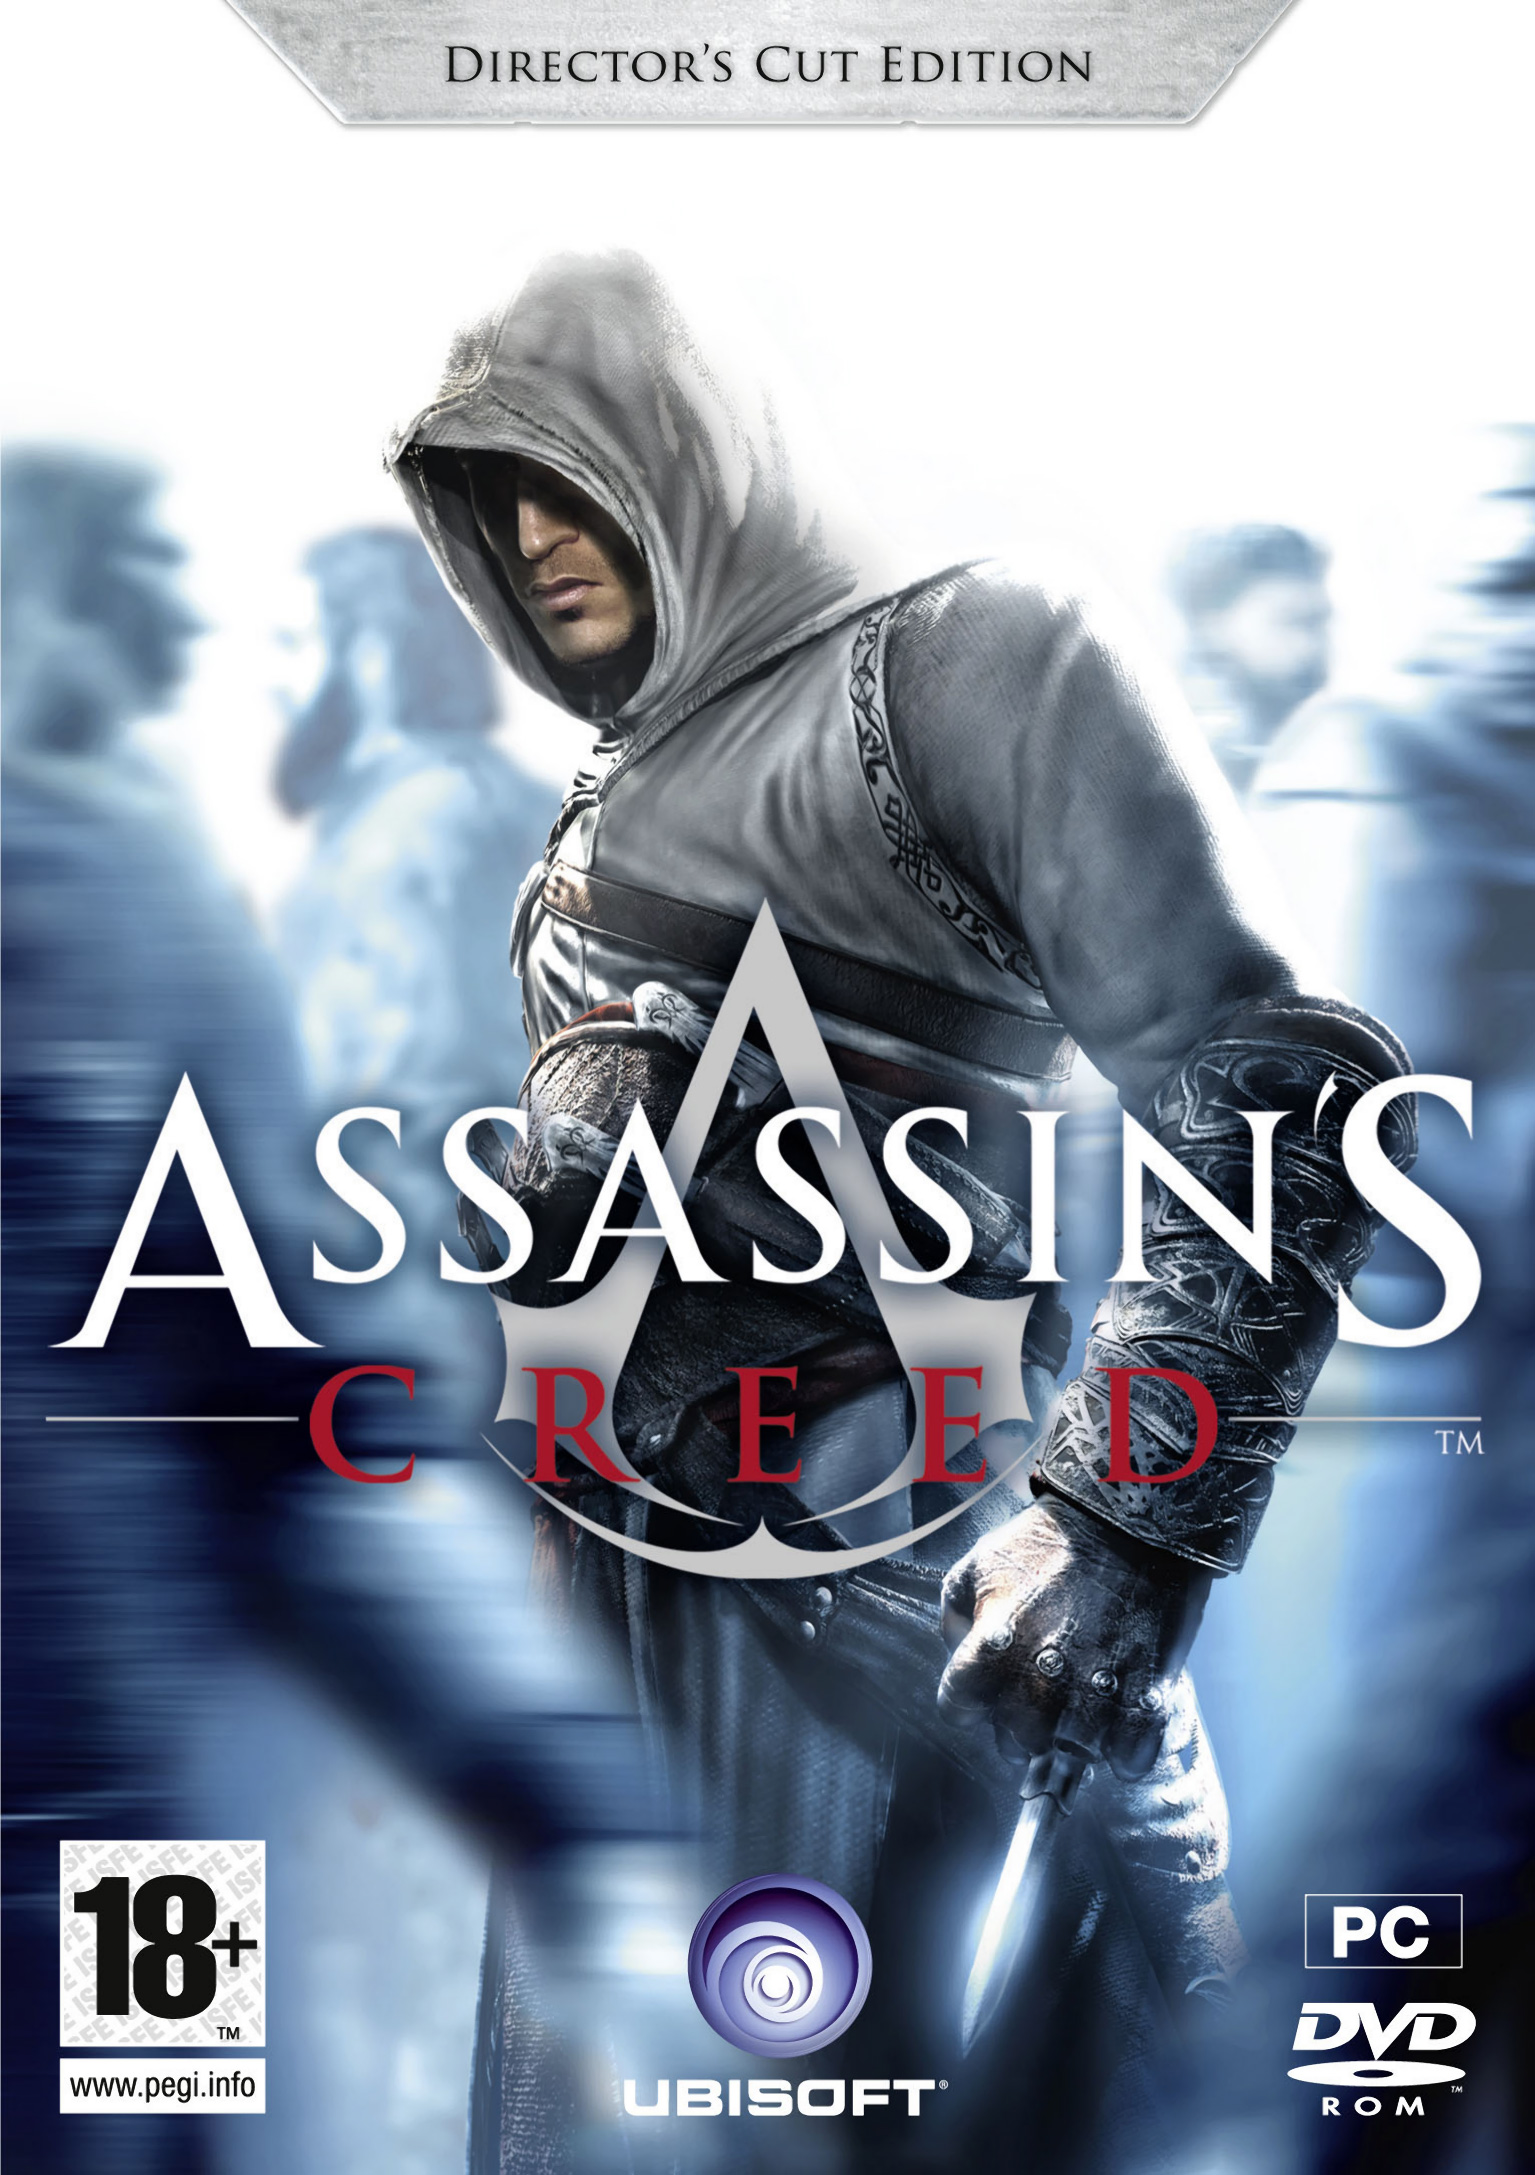 Collector's Editions - Assassin's Creed 3 Guide - IGN